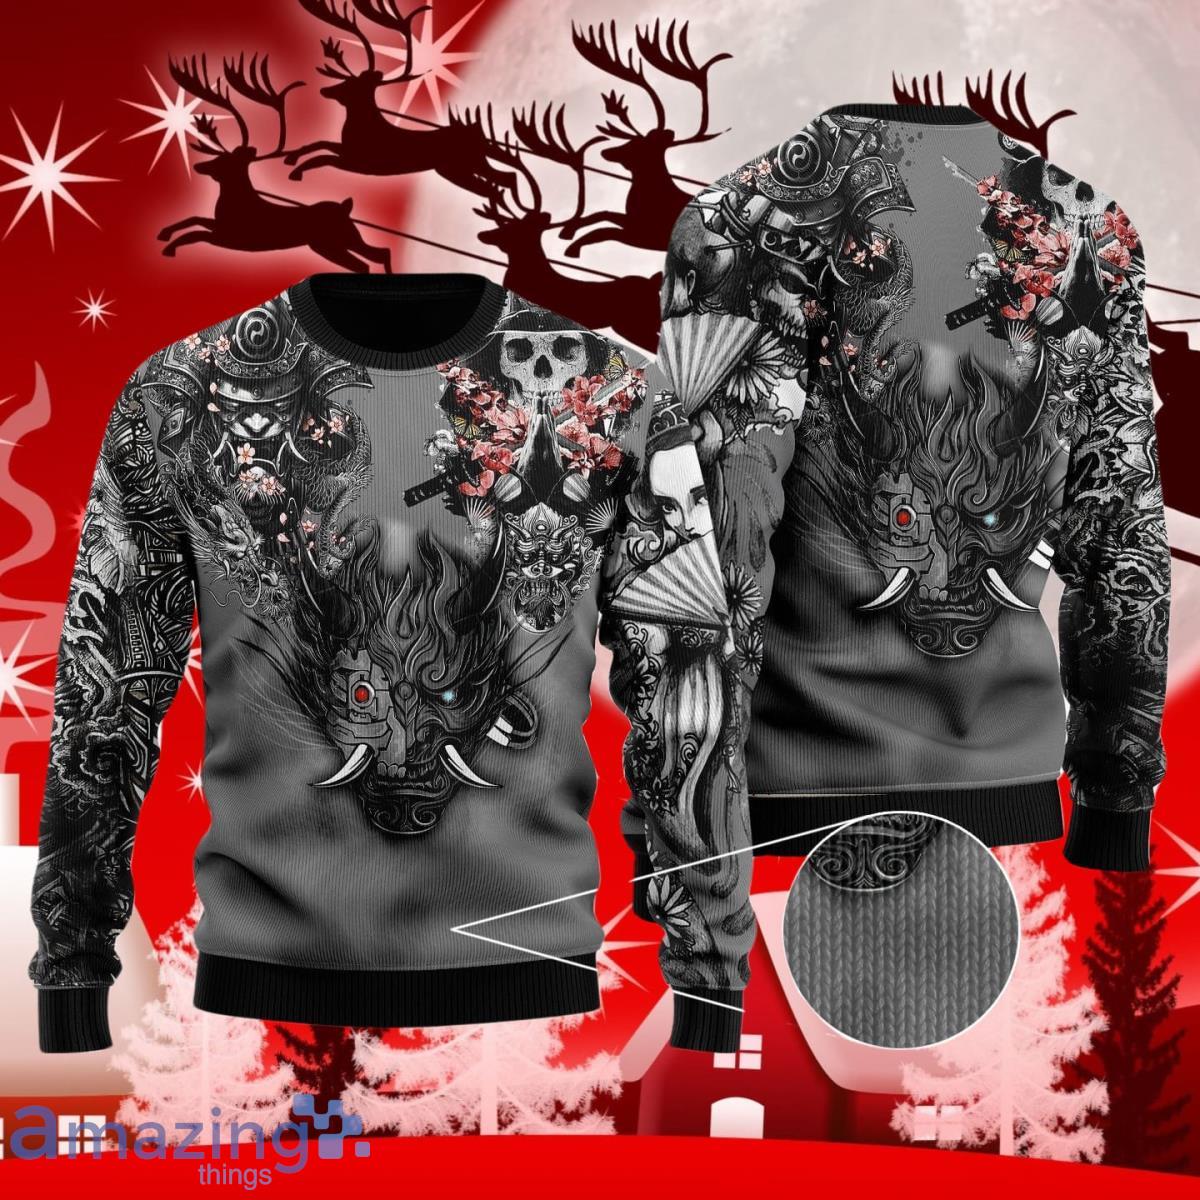 CenturyX Men Women Ugly Christmas Sweatshirts 3D Printed Pullover Funny  Hairy Chest Tattoos Sweater Novelty Party Tops Black Santa Claus XXL -  Walmart.com